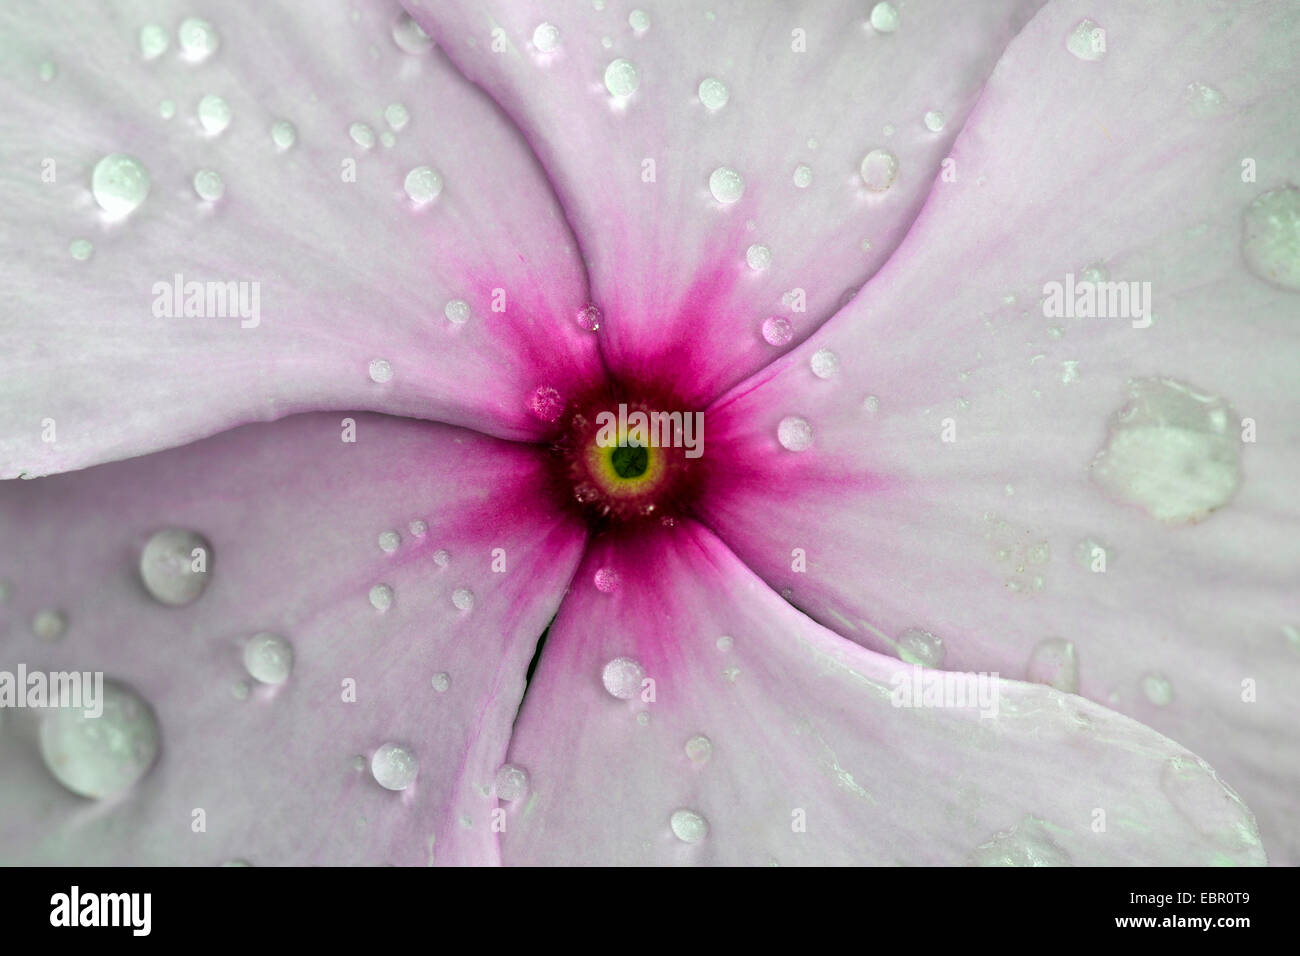 Rose periwinkle, common periwinkle, Madagascar periwinkle (Catharanthus roseus, Vinca rosea), flower with water drops, detail Stock Photo